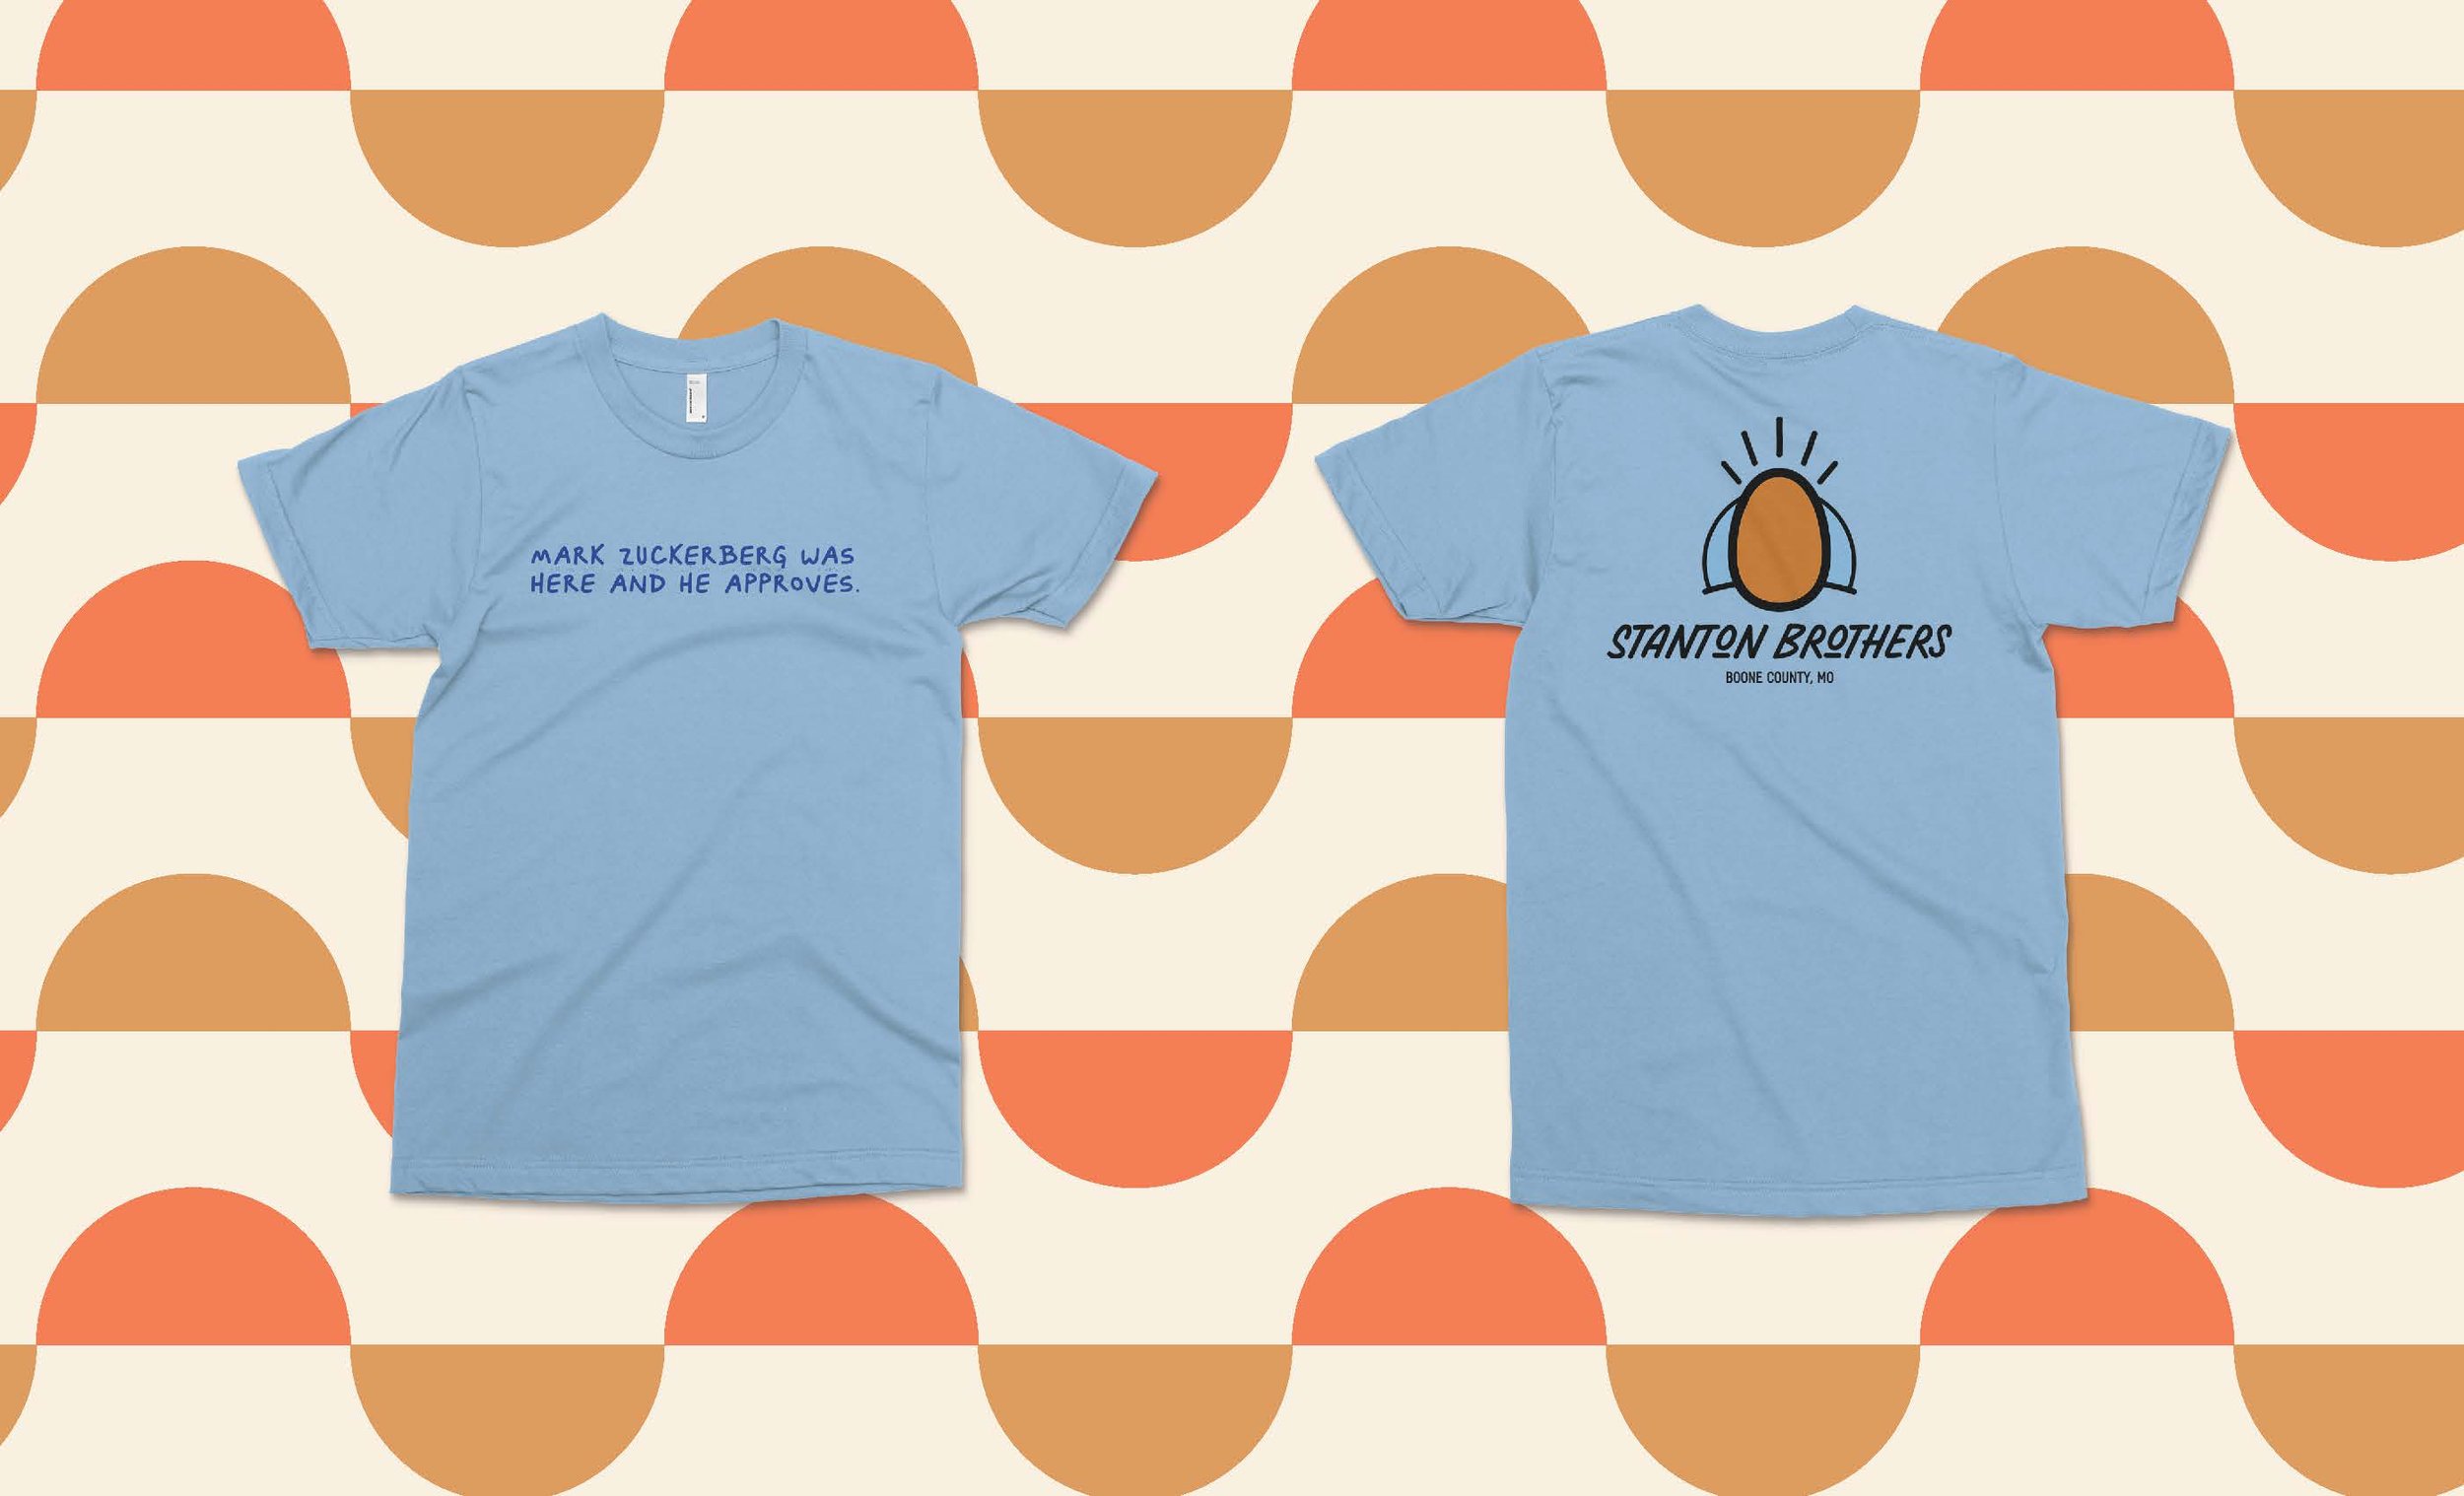  Stanton Brothers t-shirt mock-up. Blue t-shirt with Standton Brothers egg logo. 